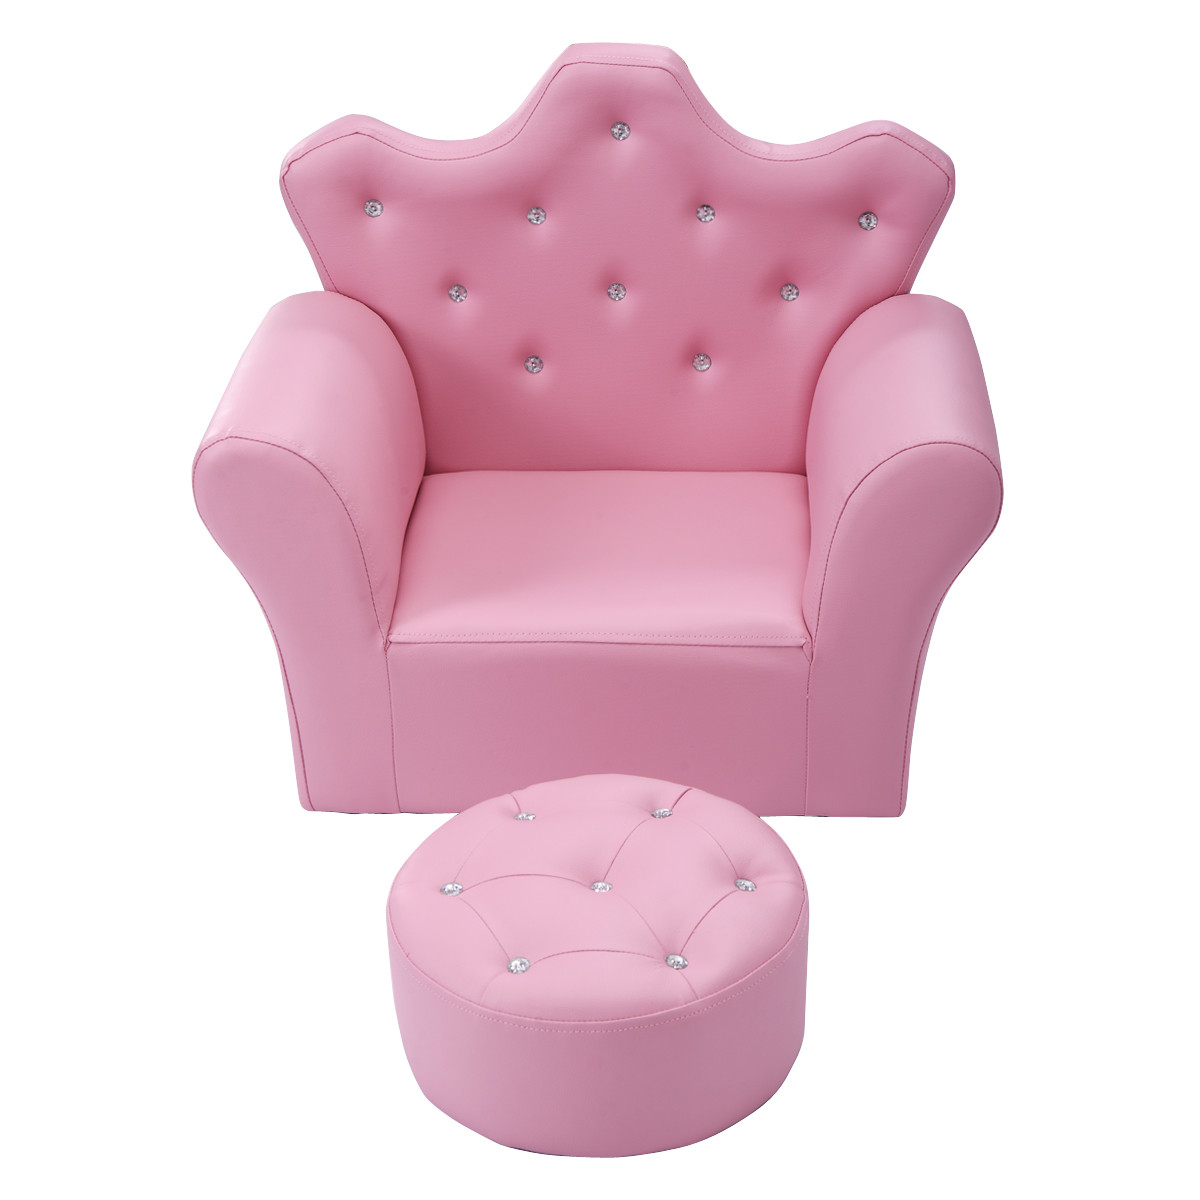 Kids Chair With Ottoman
 Single Sponge Sofa Toddler Children Leisure Chair with